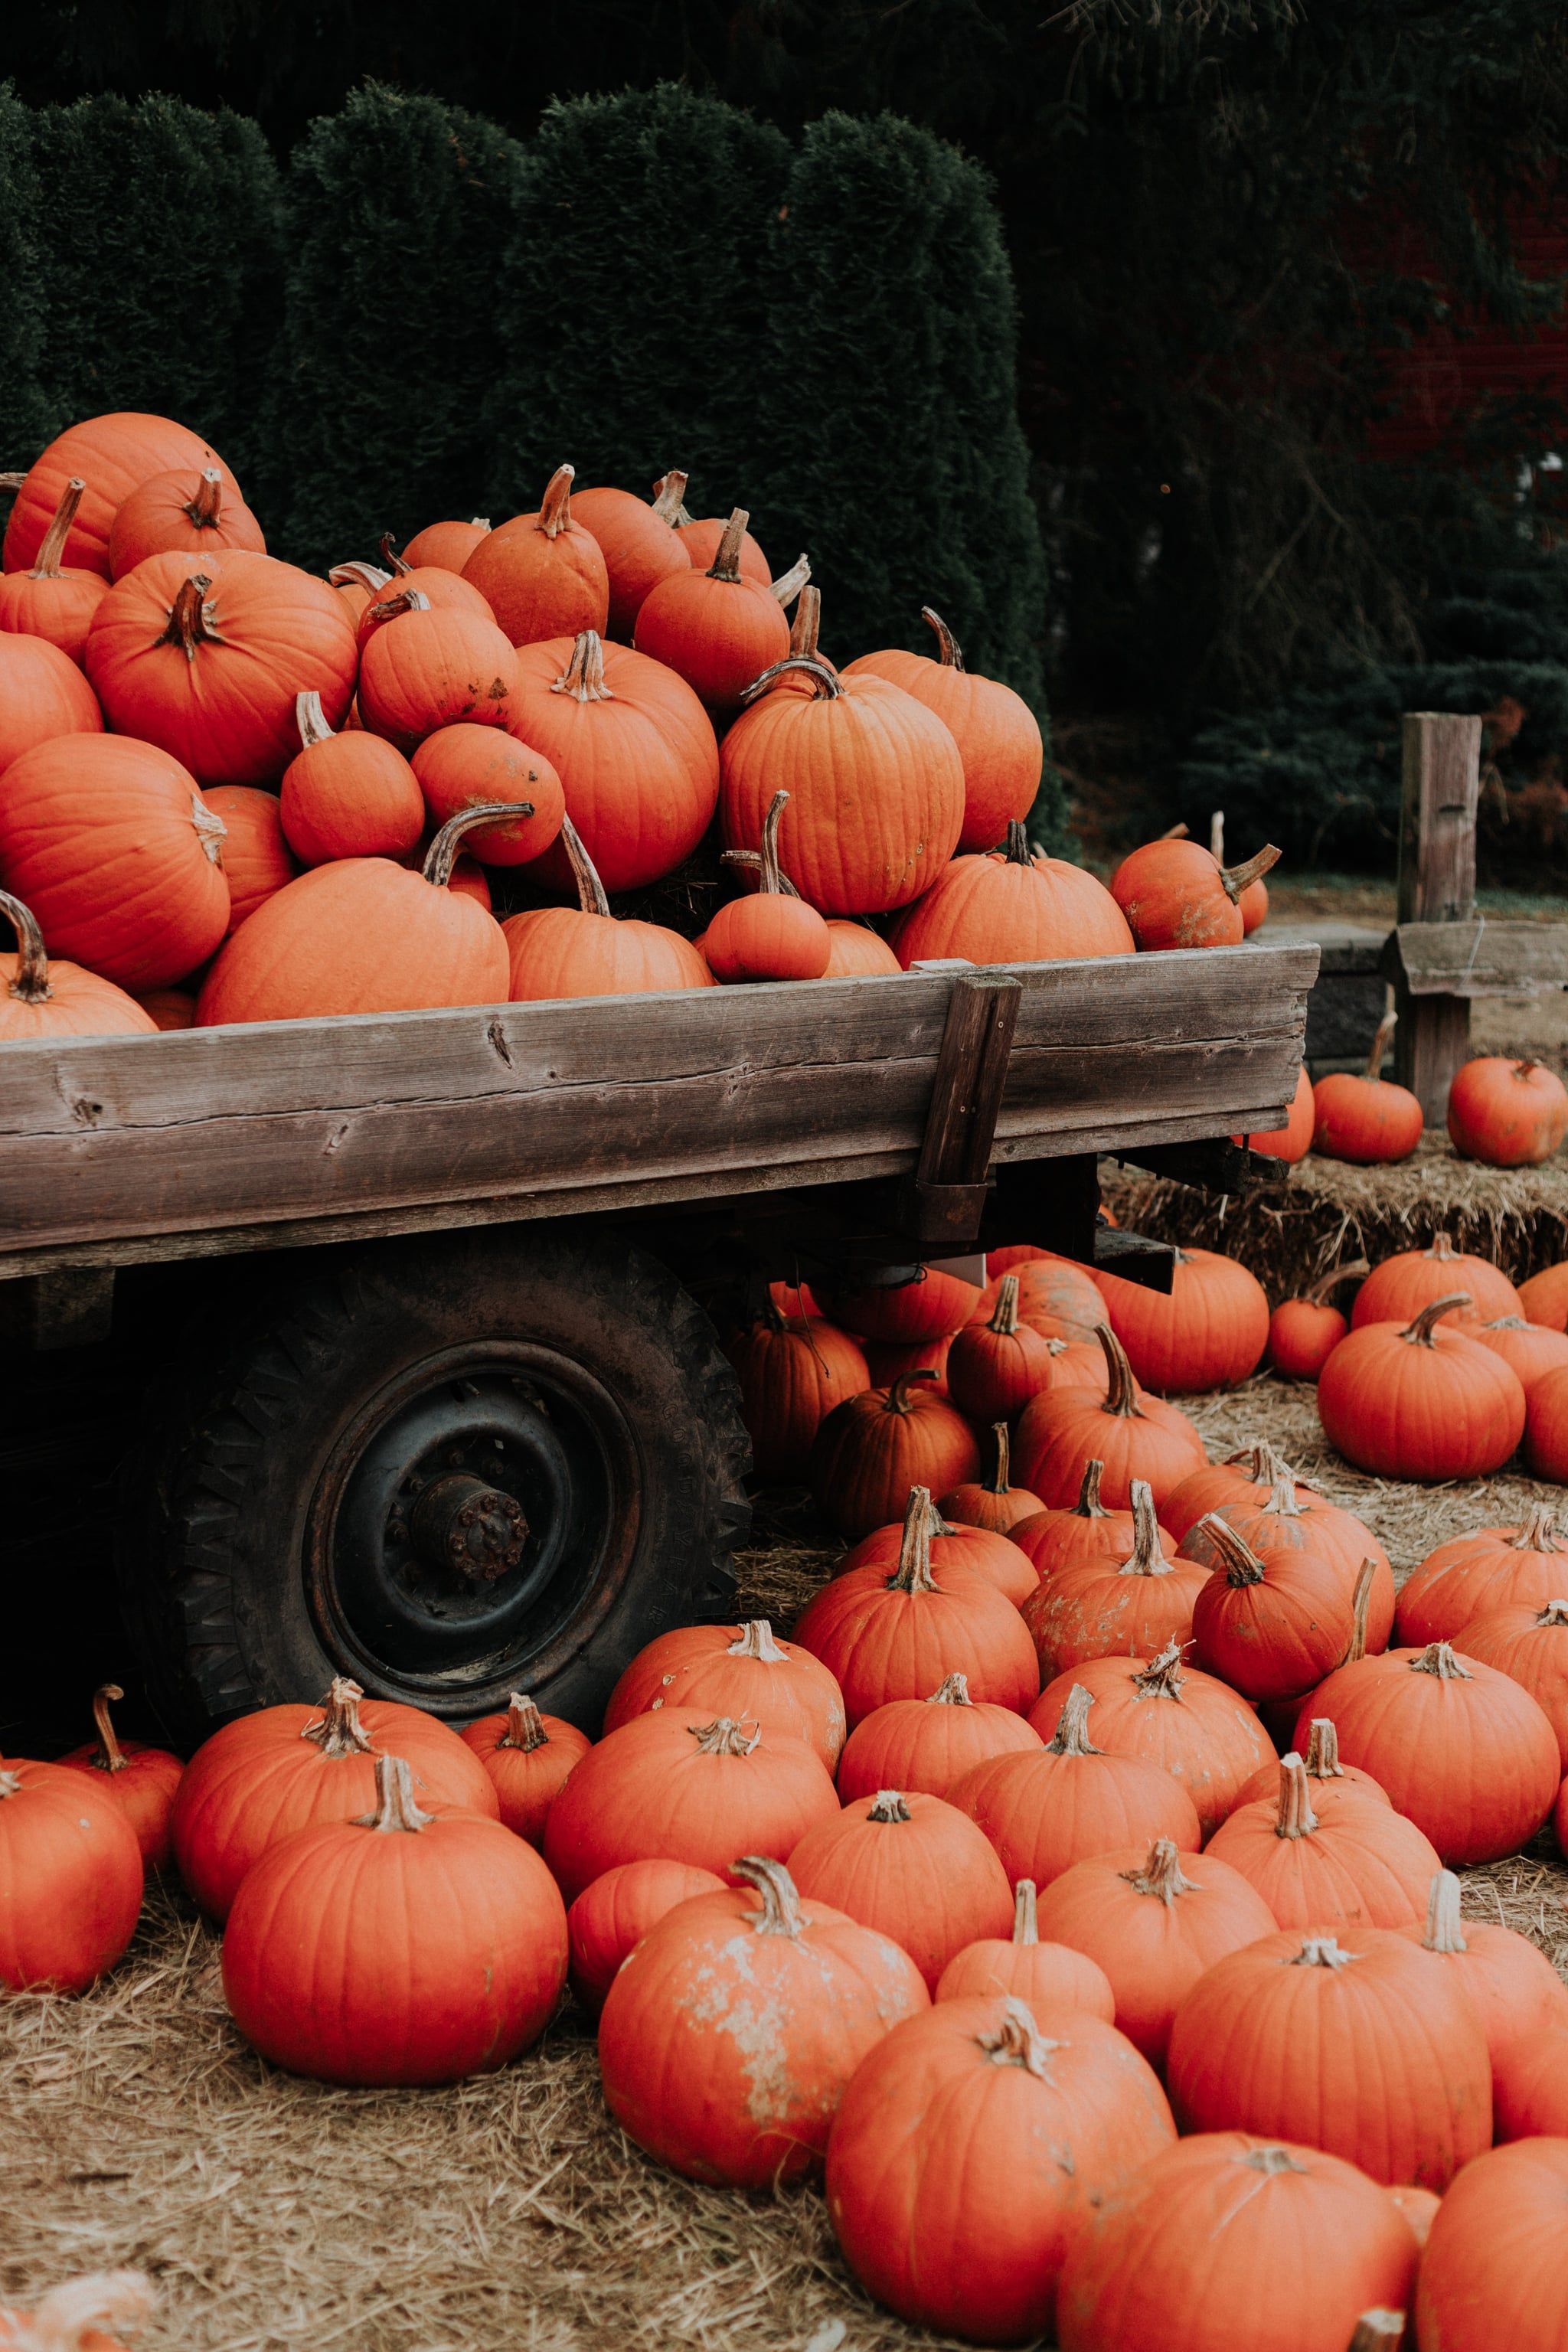 A wooden cart piled high with pumpkins. - Cozy, fall, iPhone, pumpkin, photography, vintage fall, cool, fall iPhone, October, warm, cute fall